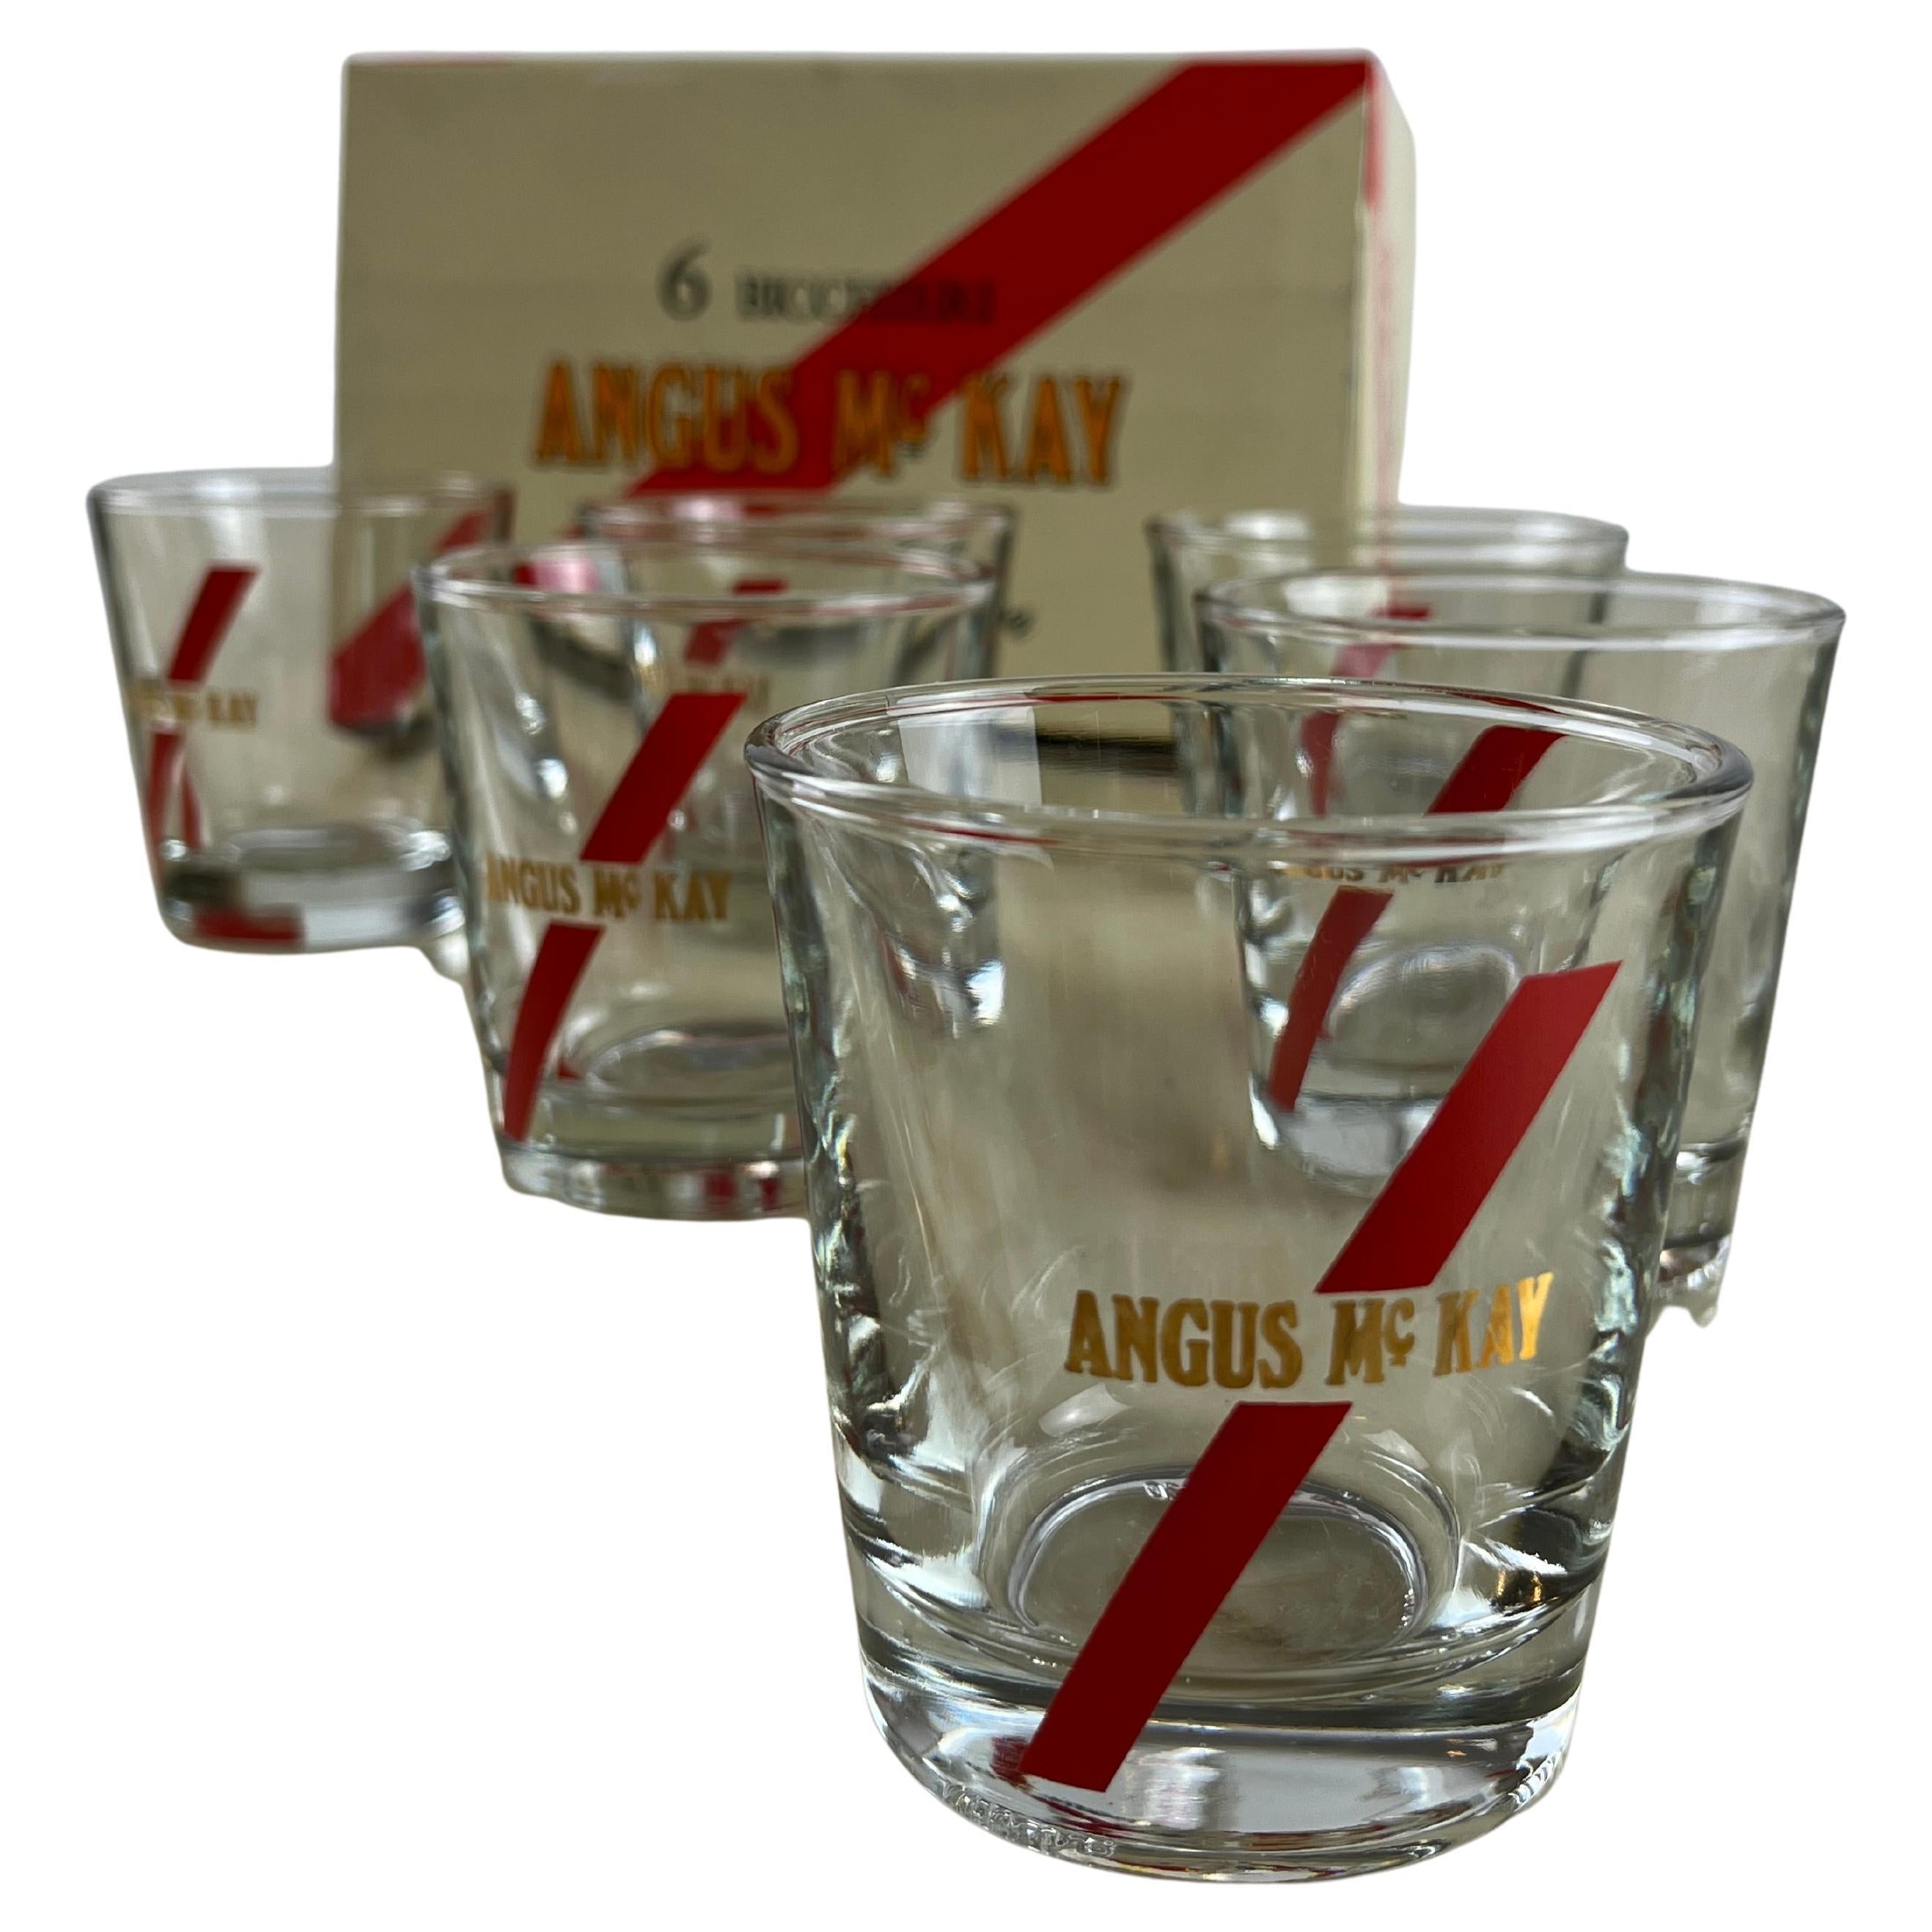 Six Vintage Whiskey Glasses, Boxed, Never Used, Augus Mc Kay, 1970 For Sale